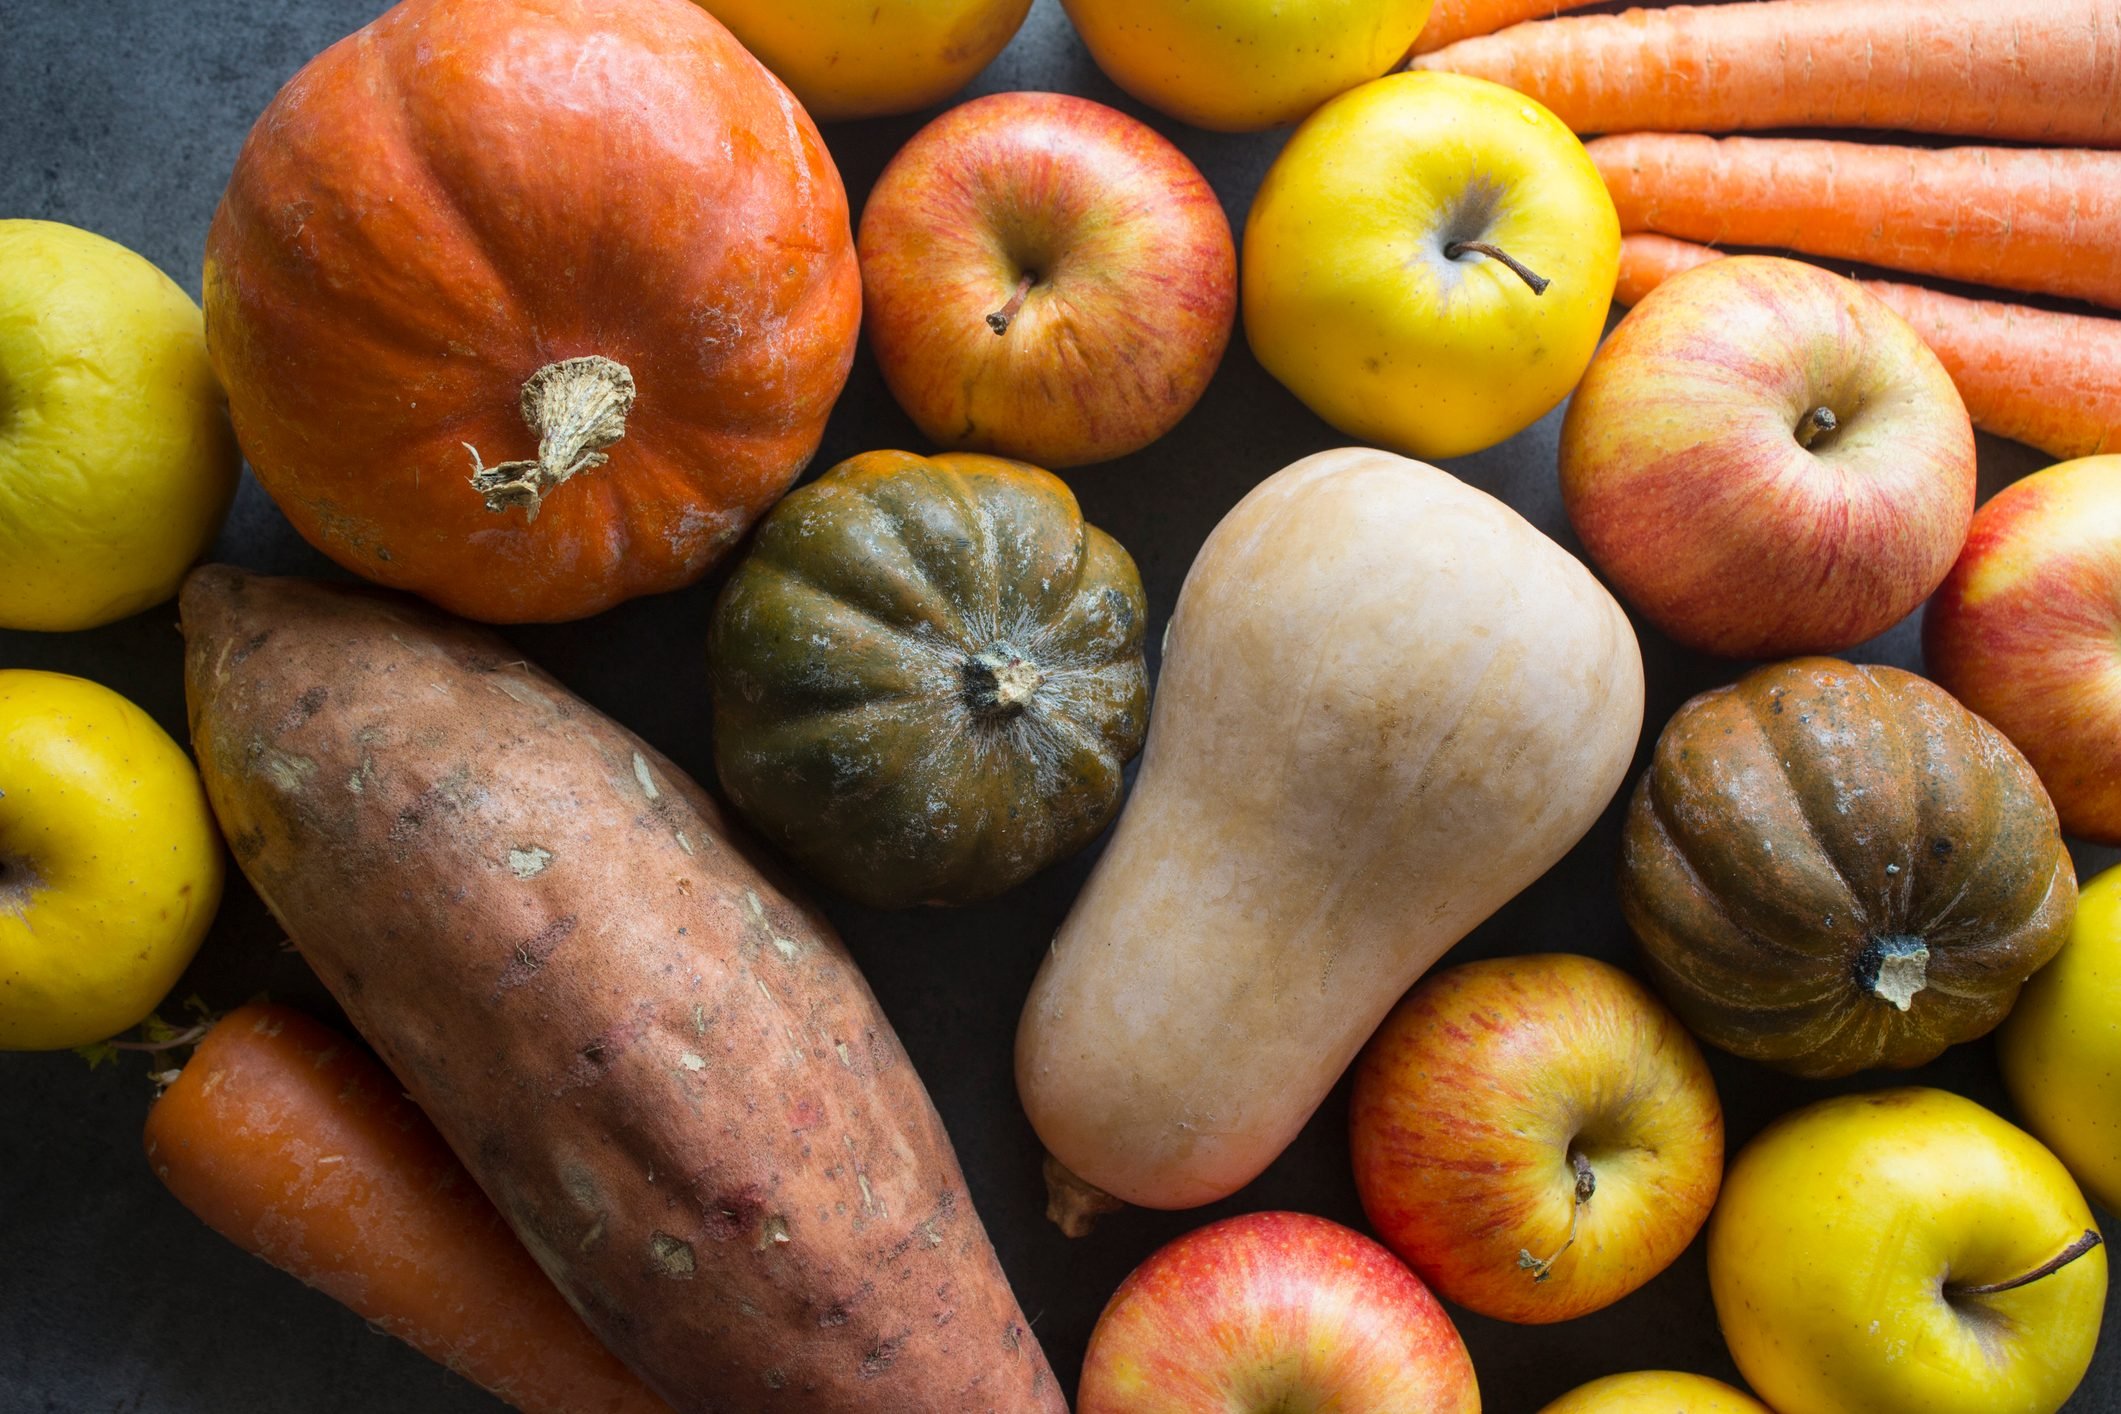 How to store fall and winter produce: apples, broccoli, potatoes